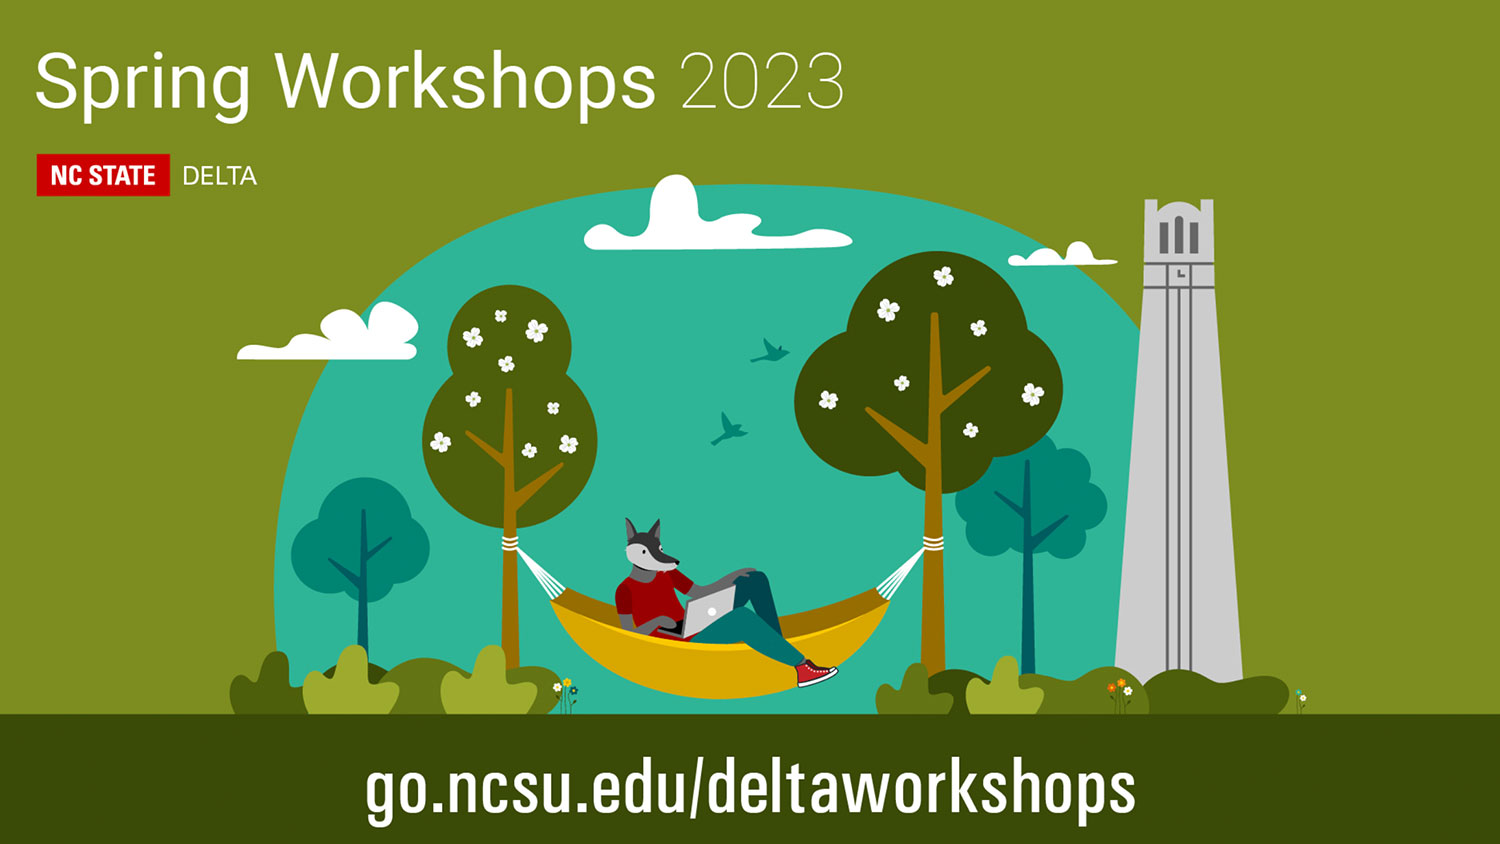 Spring 2023 Workshop Flyer with trees